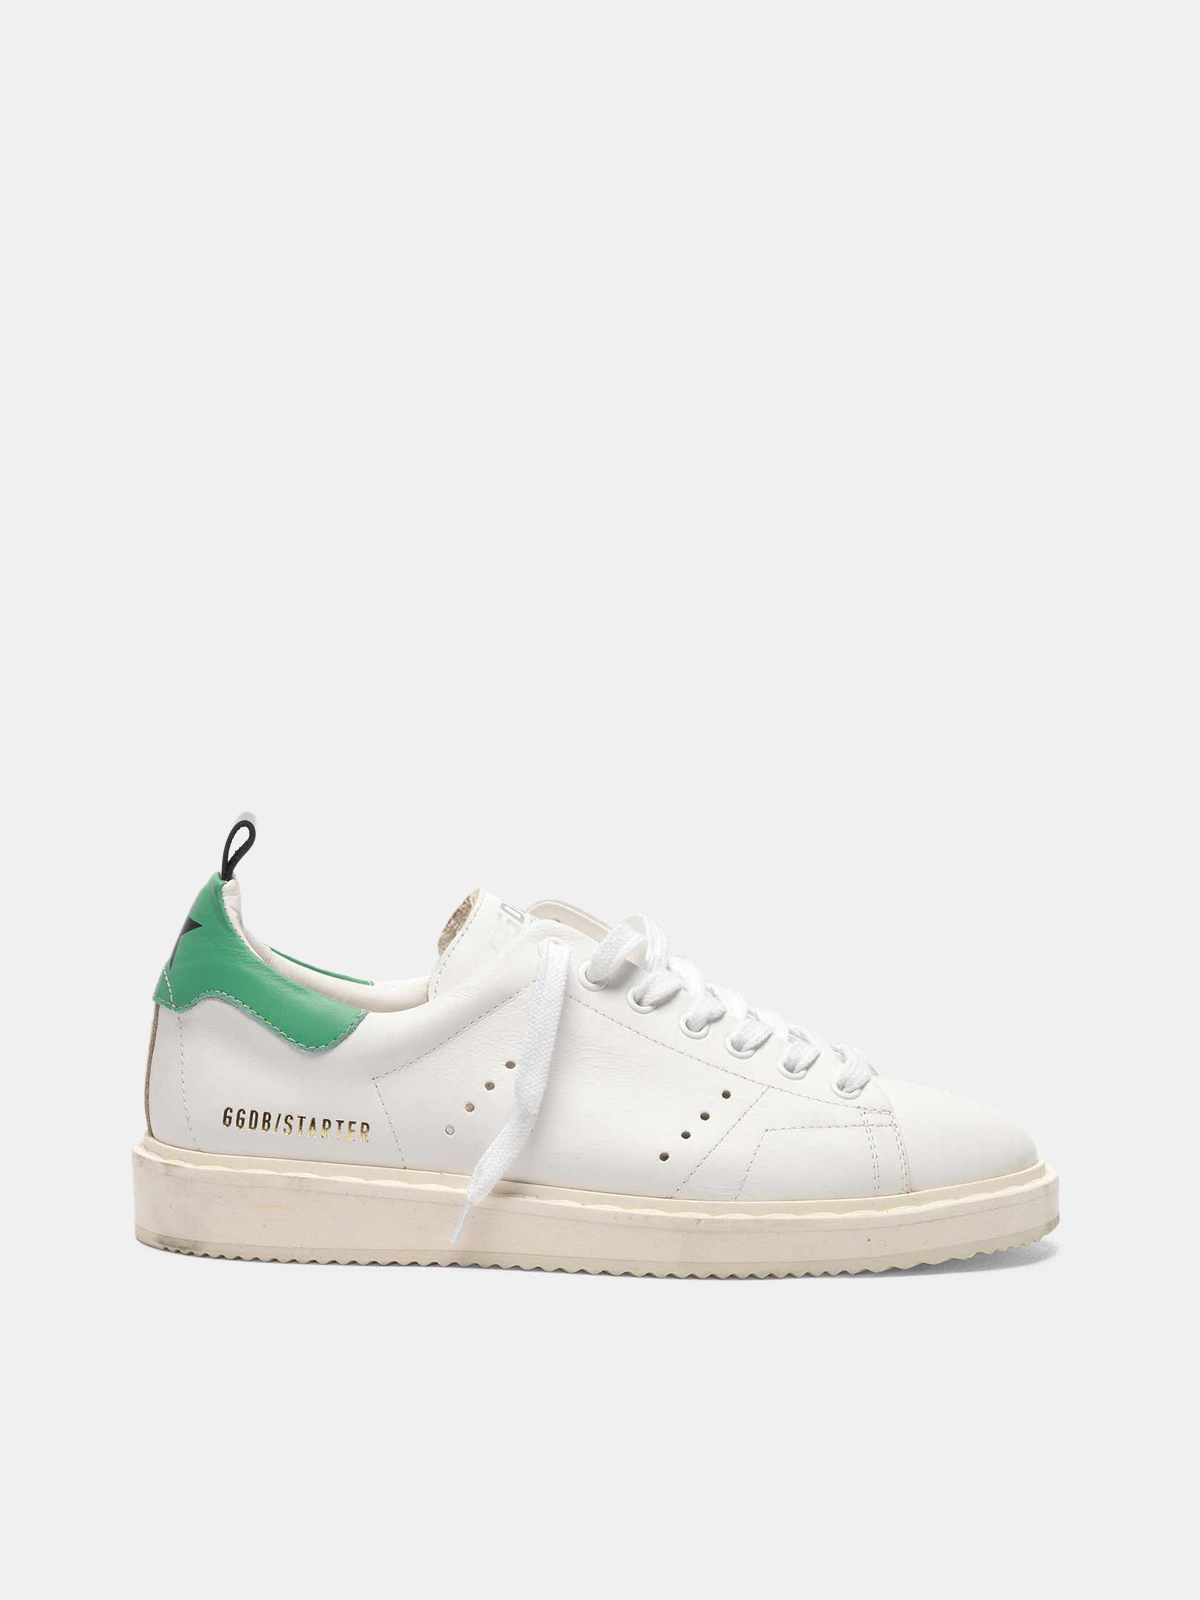 Starter sneakers in leather with green heel tab | Golden Goose